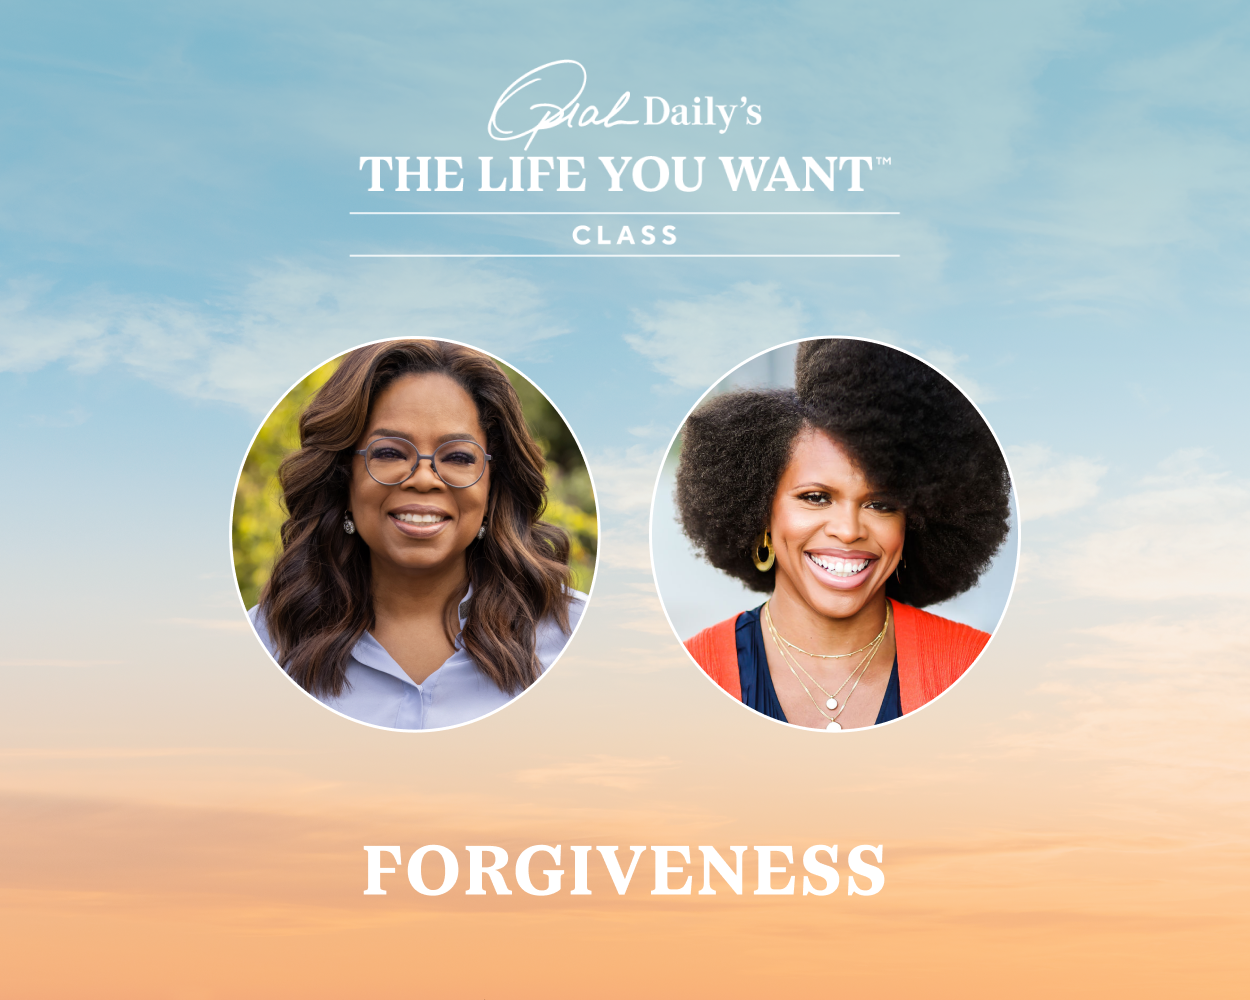 watch oprah’s the life you want class on forgiveness